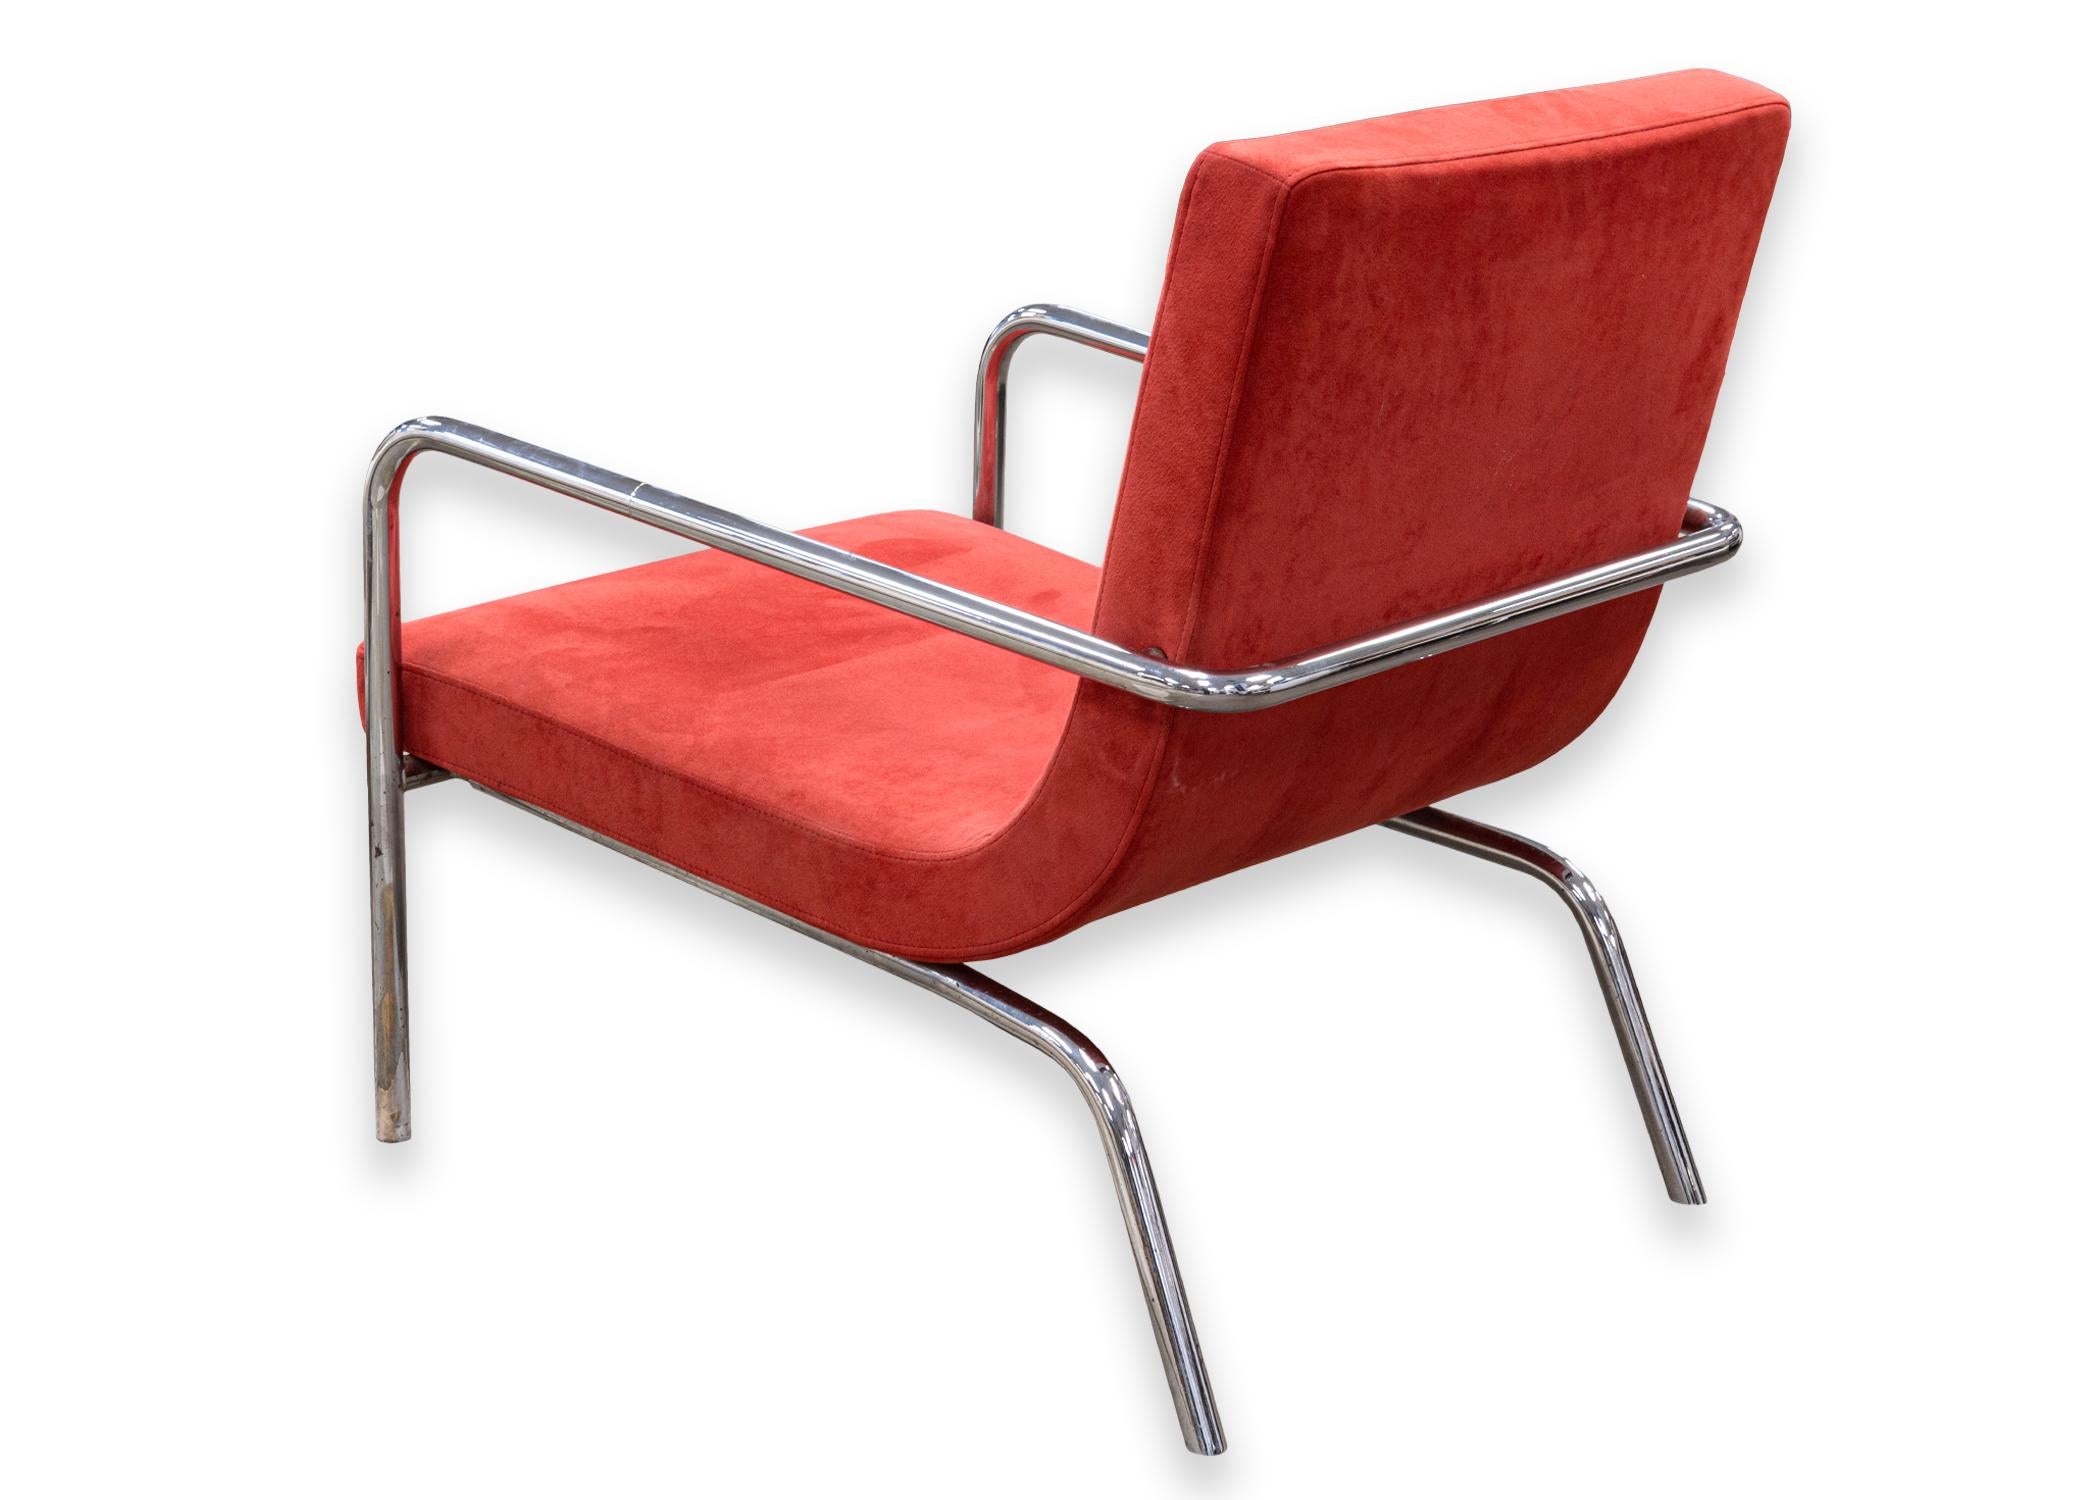 20th Century Ligne Roset Dessau Contemporary Modern Chrome and Red Suede Leather Lounge Chair